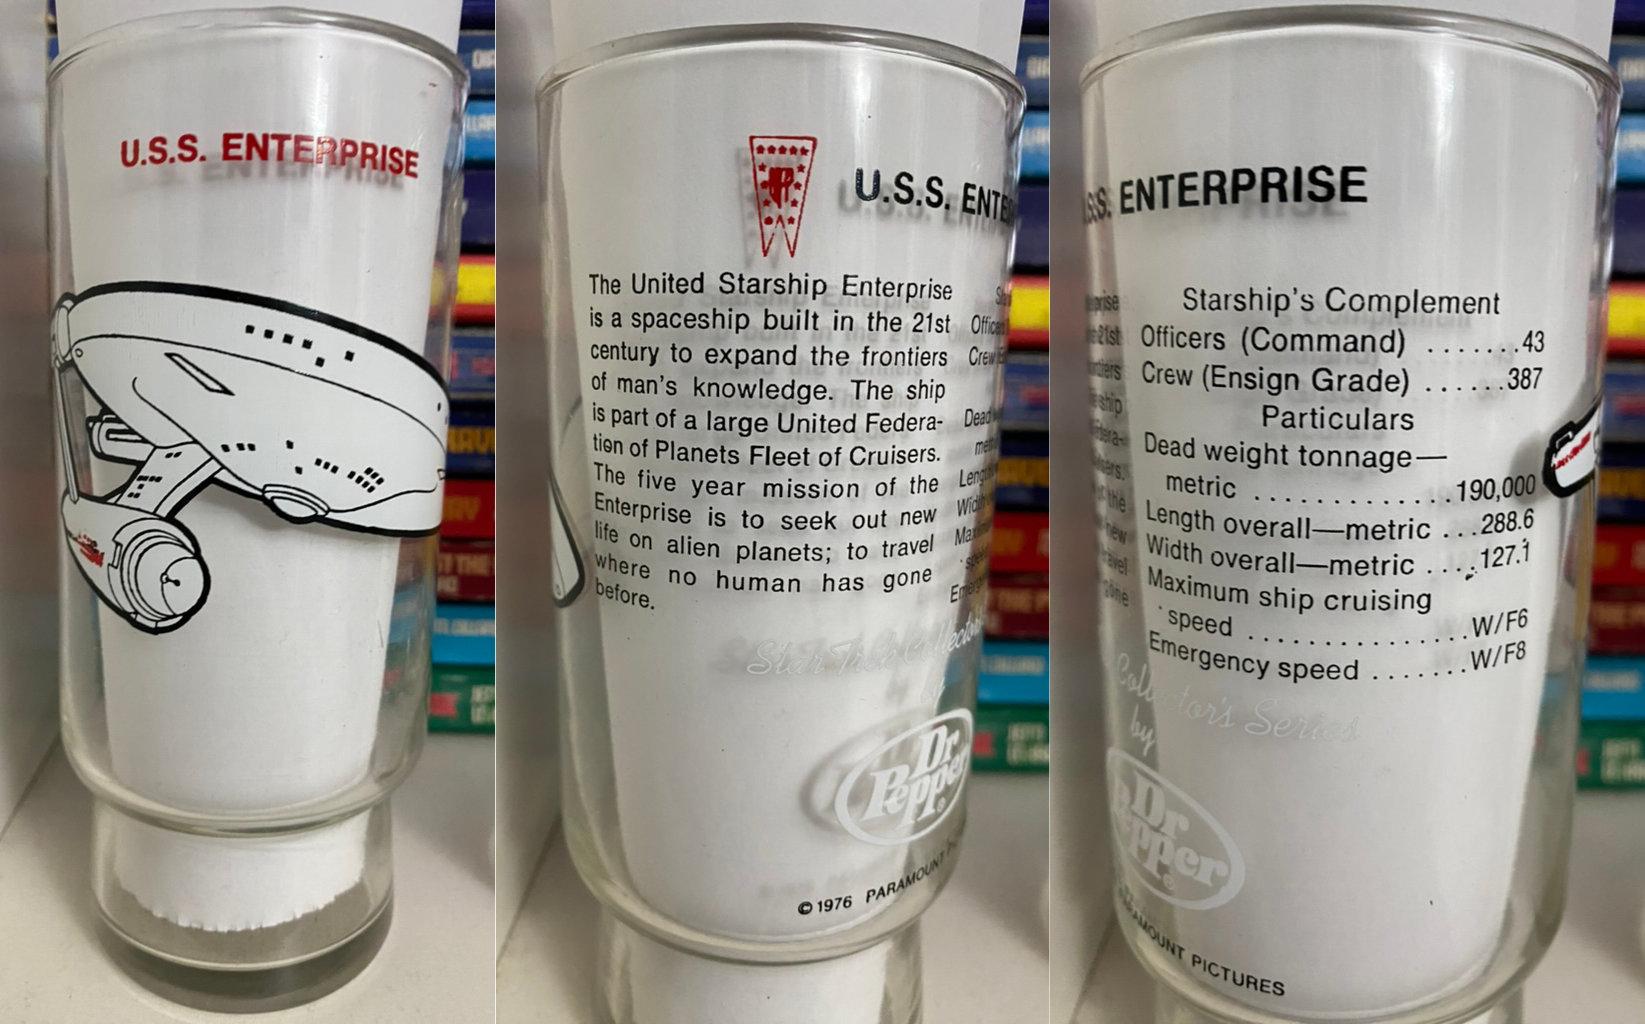 A photocollage of the front and back of the Enterprise glass, with a piece of white paper placed inside the glass to make the artwork easier to view.